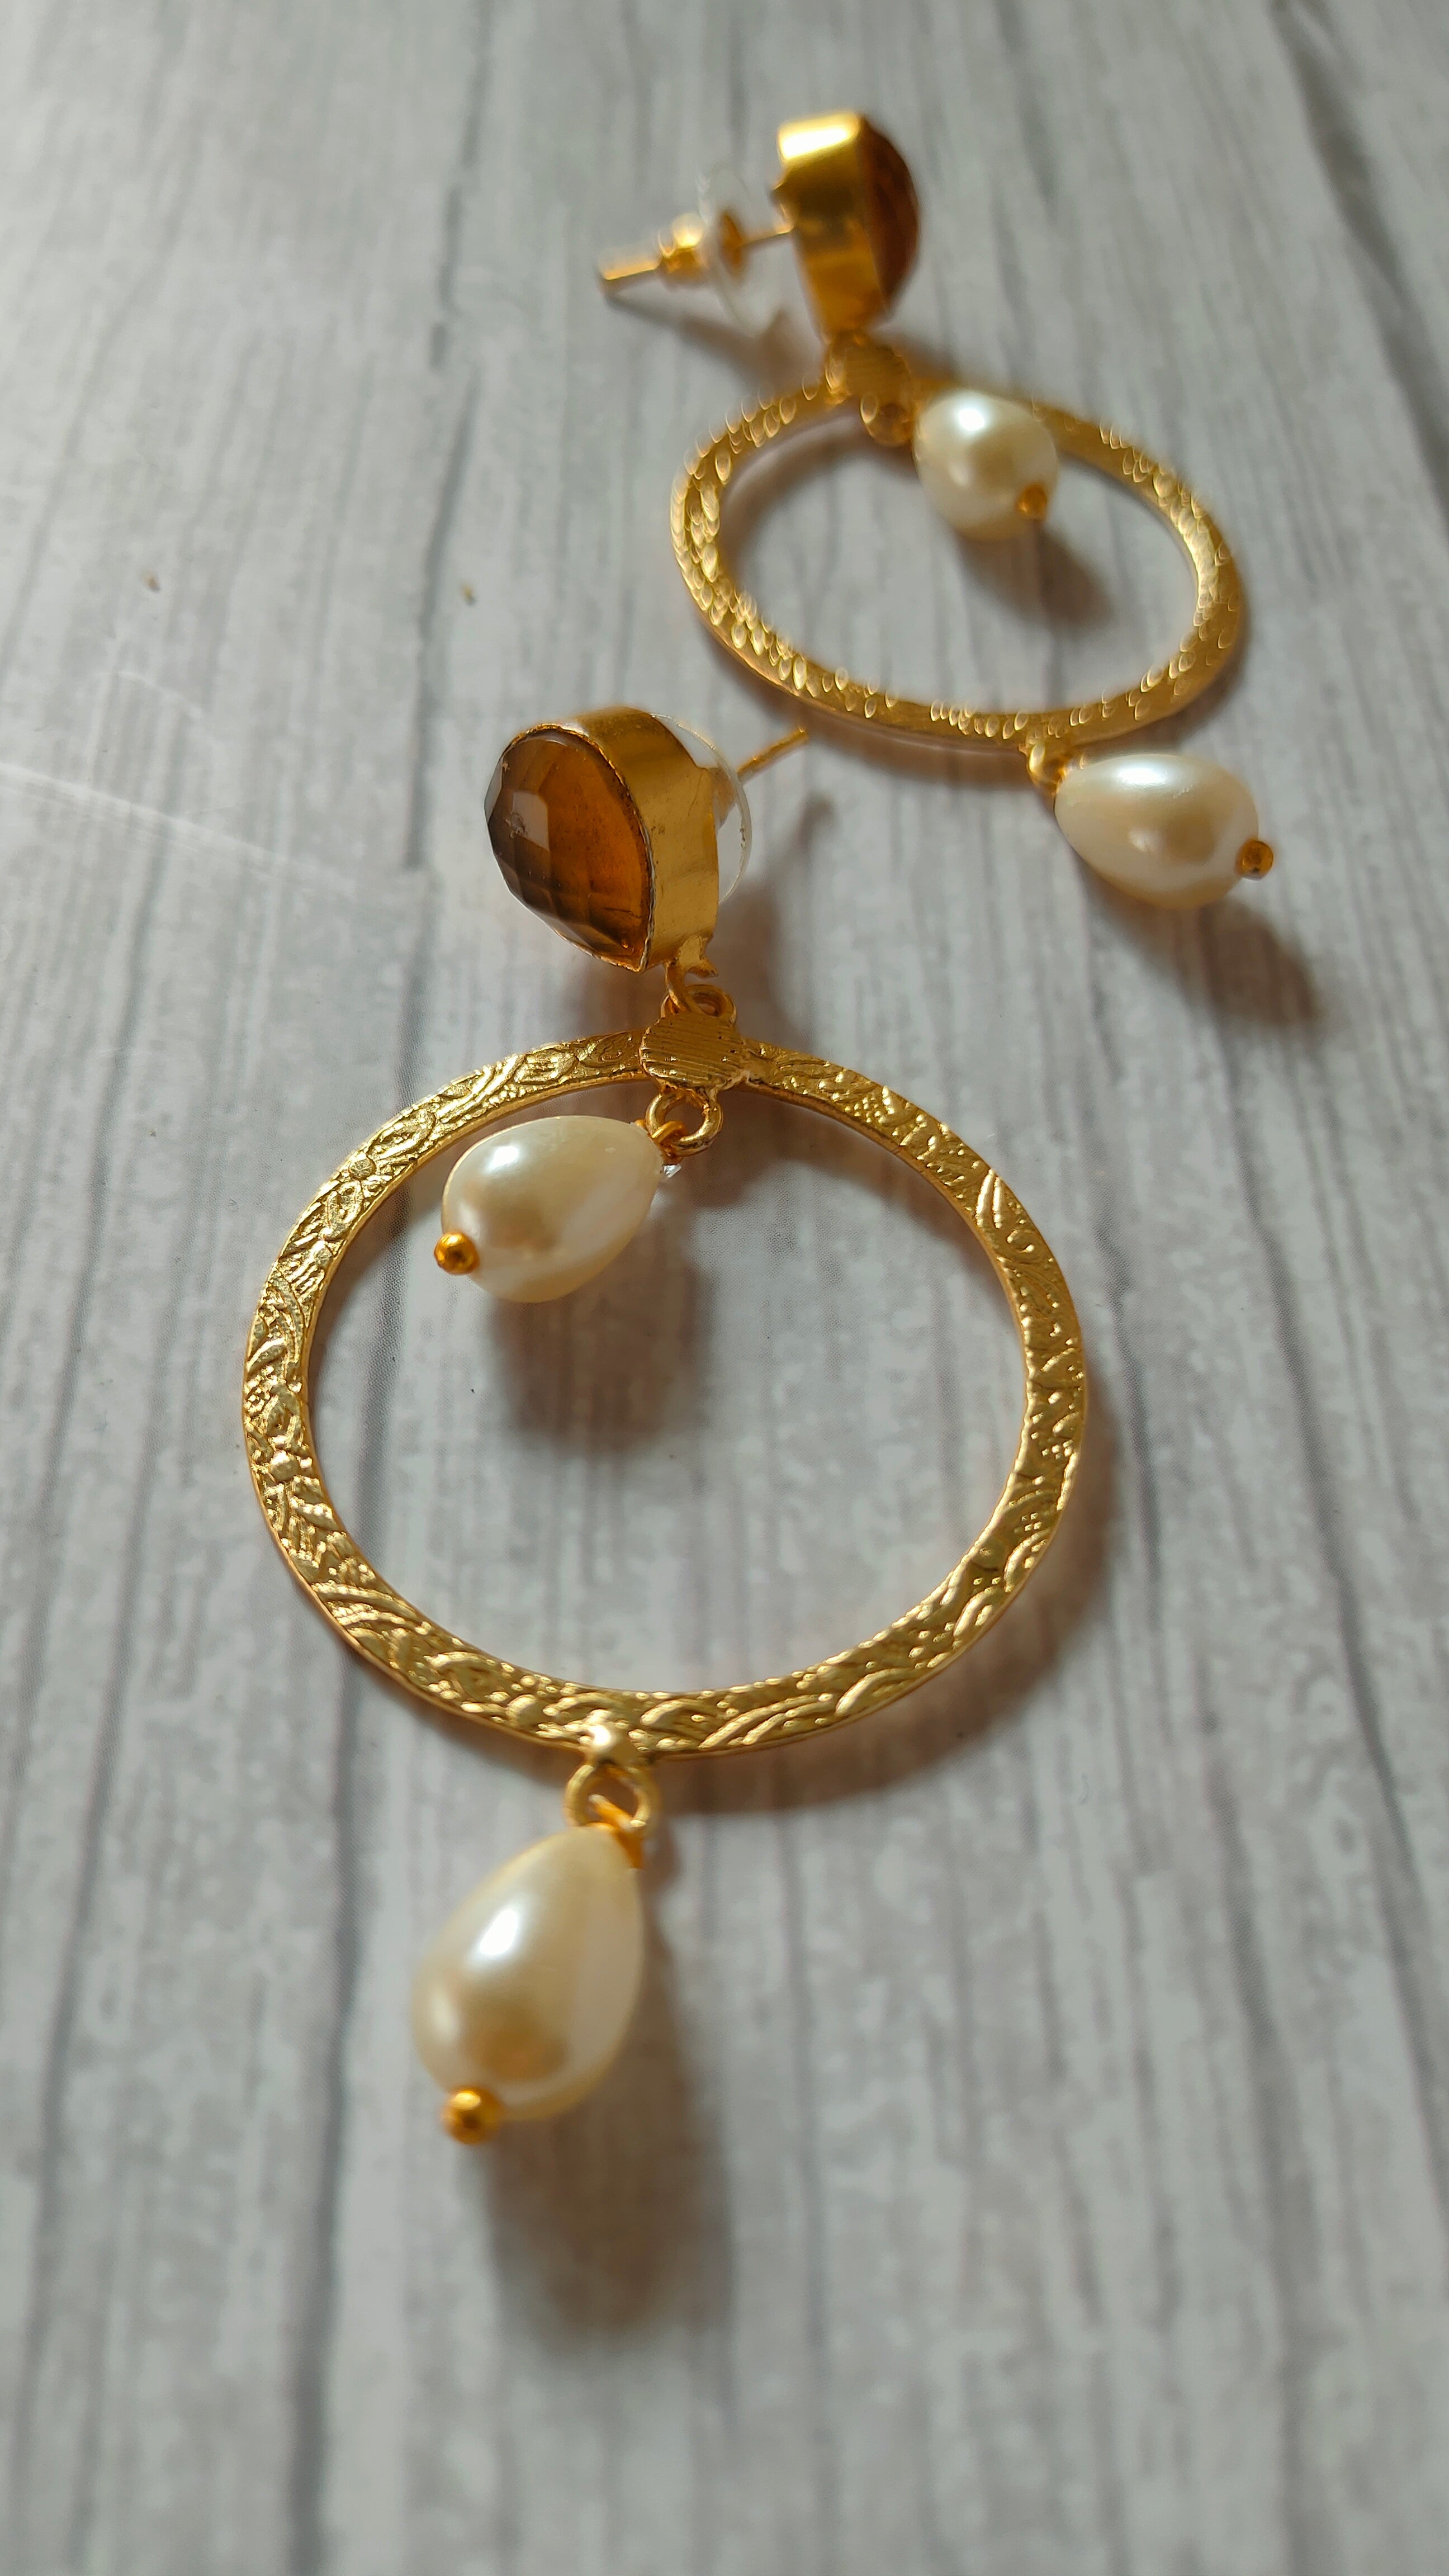 Circular Brass Dangler Earrings with Pearl Beads and Stone